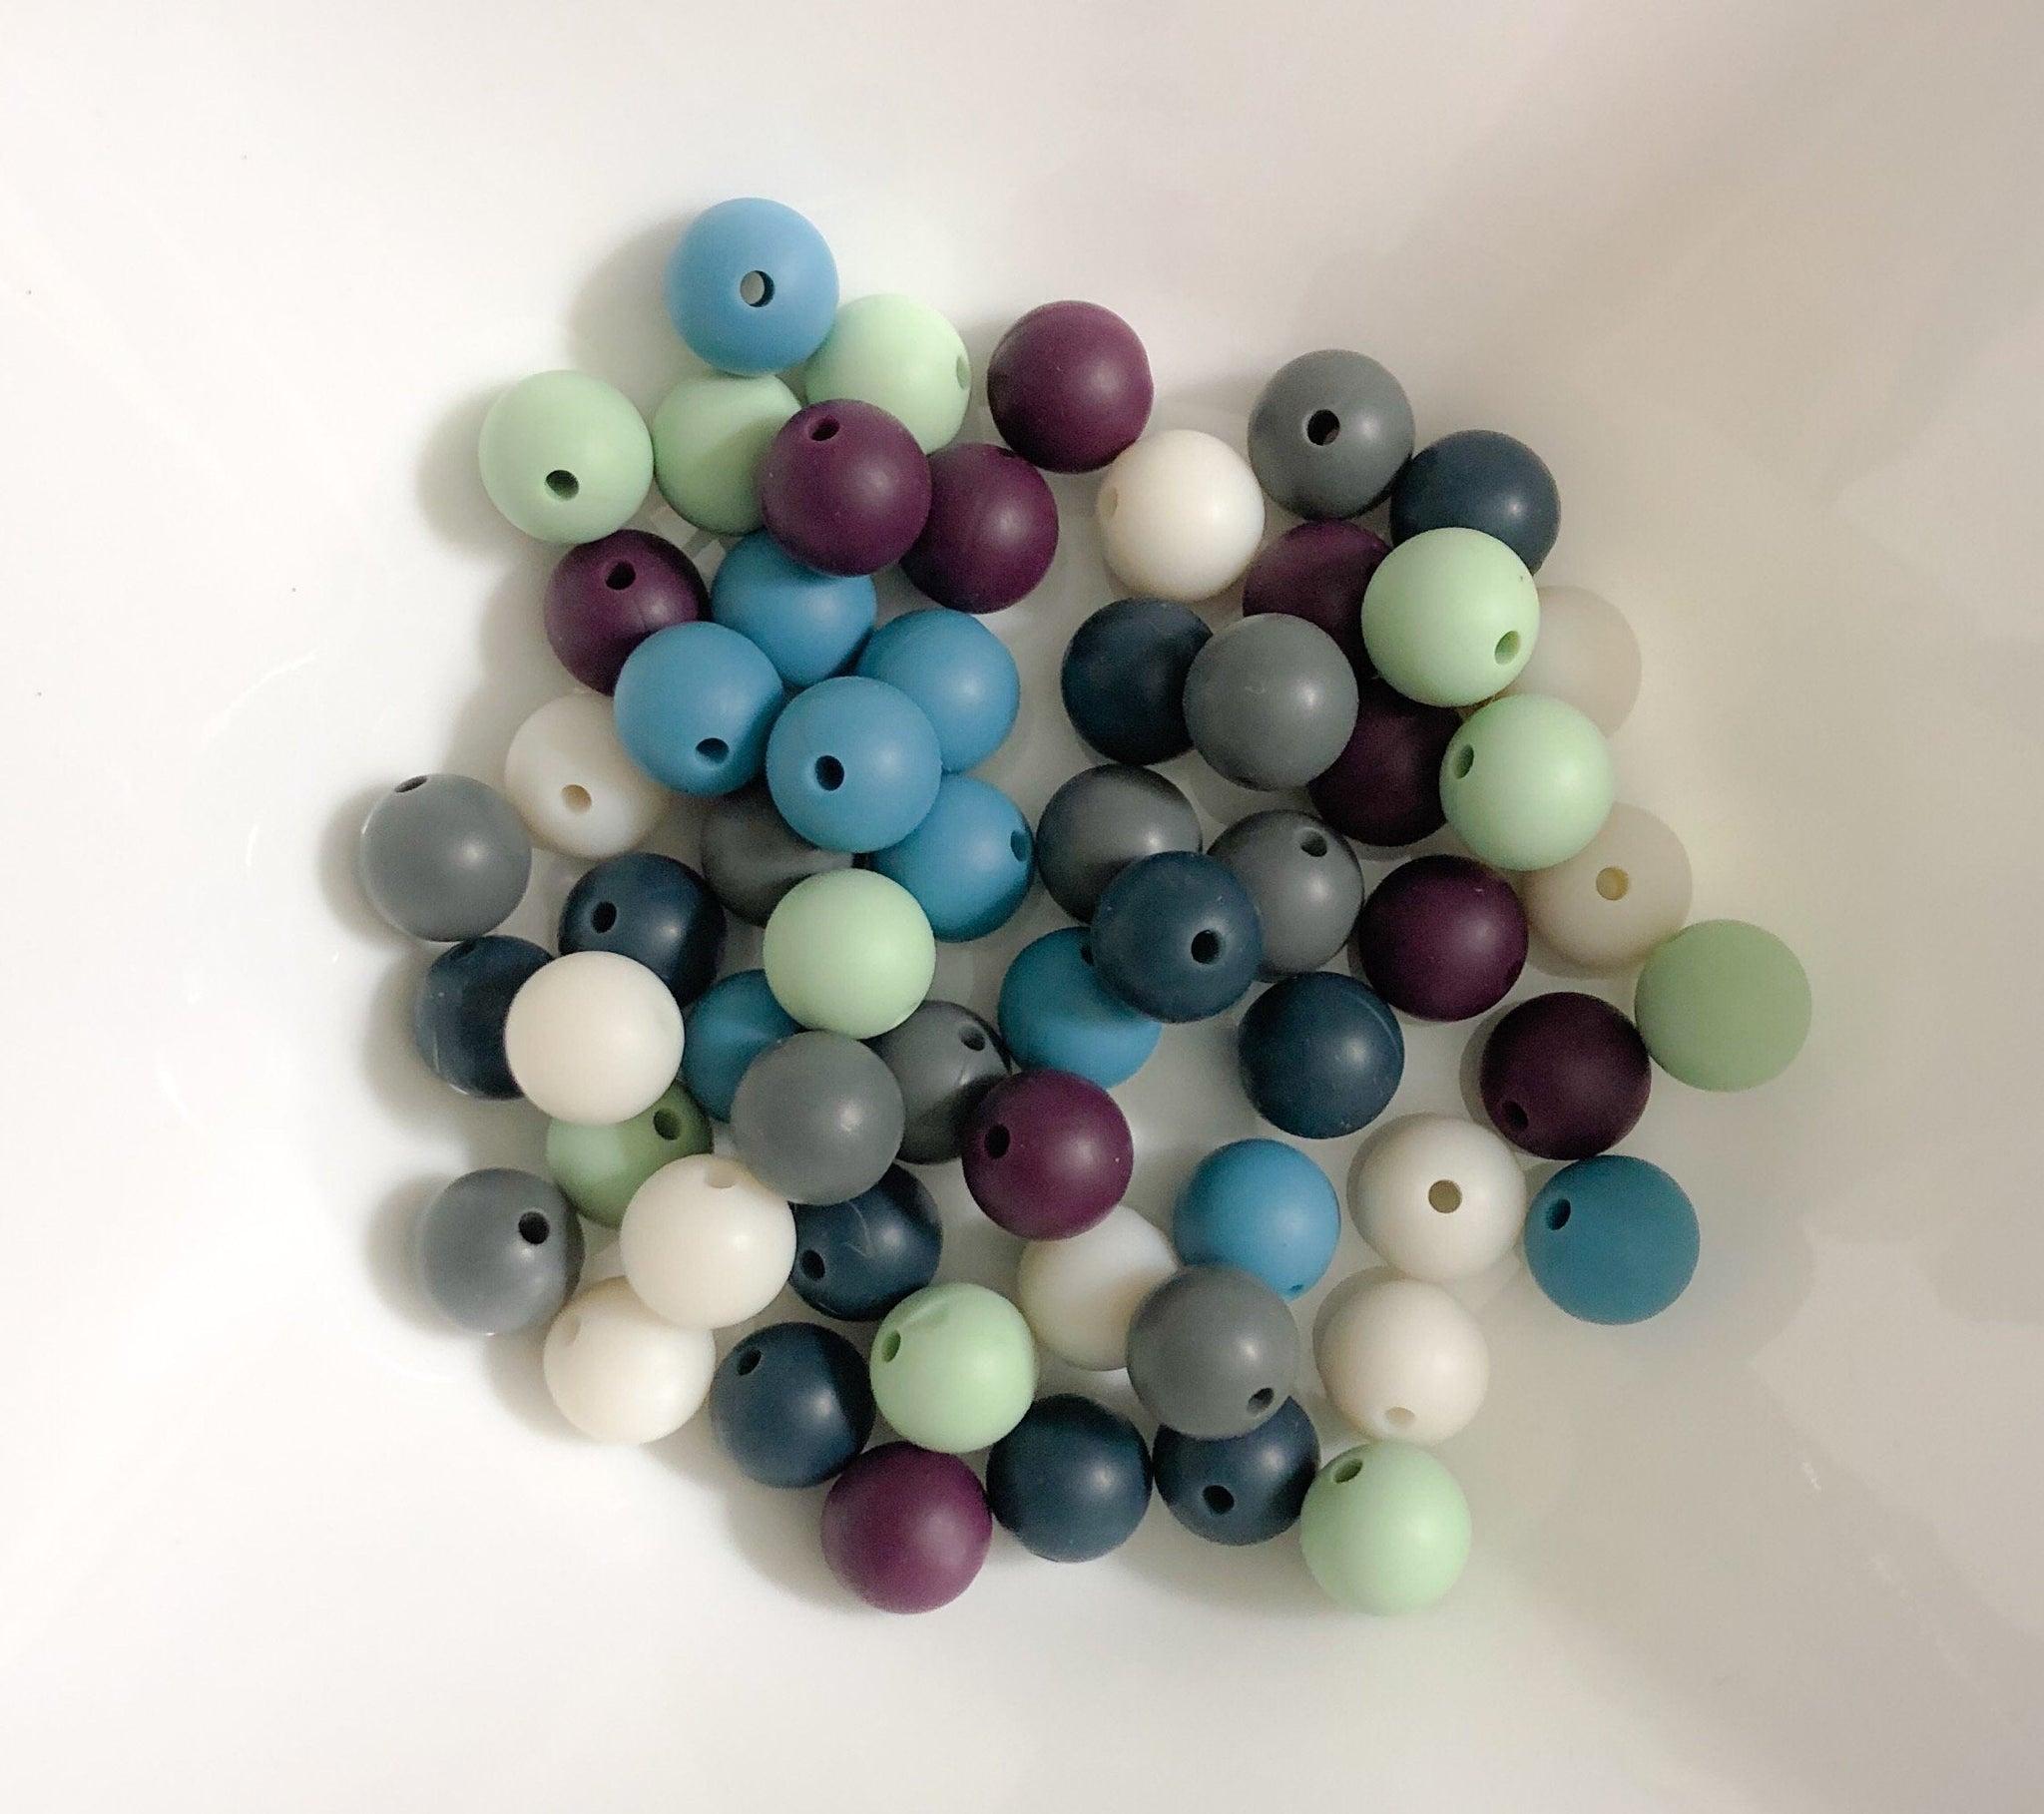 60 Bulk Silicone Beads - Farmhouse Picnic - Wedgewood, Violet, Prussian, Steel, Sweet Mint, Seal